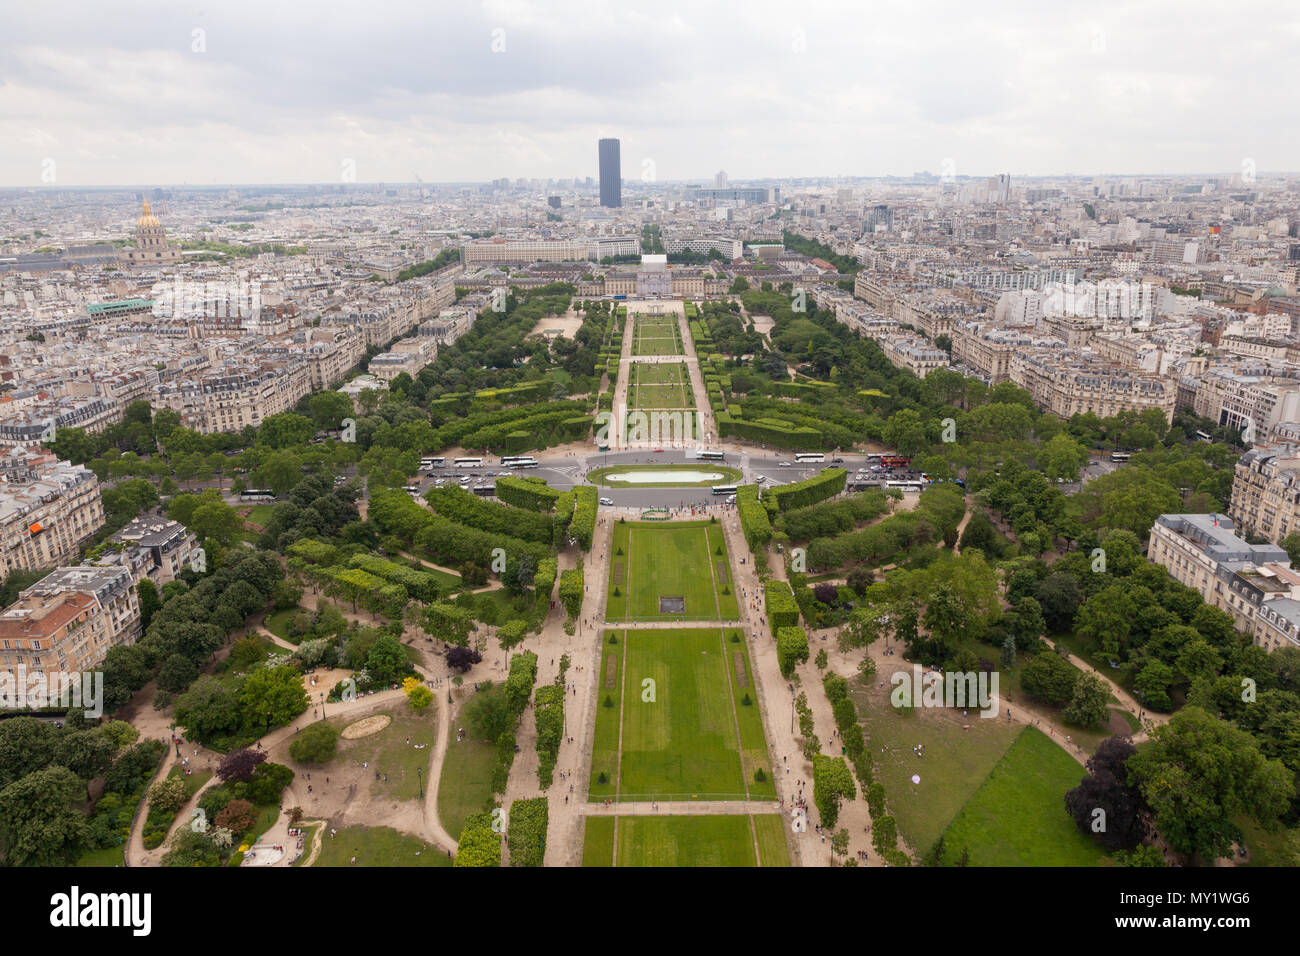 View from the second floor of the Eiffel Tower, Paris, France. Stock Photo